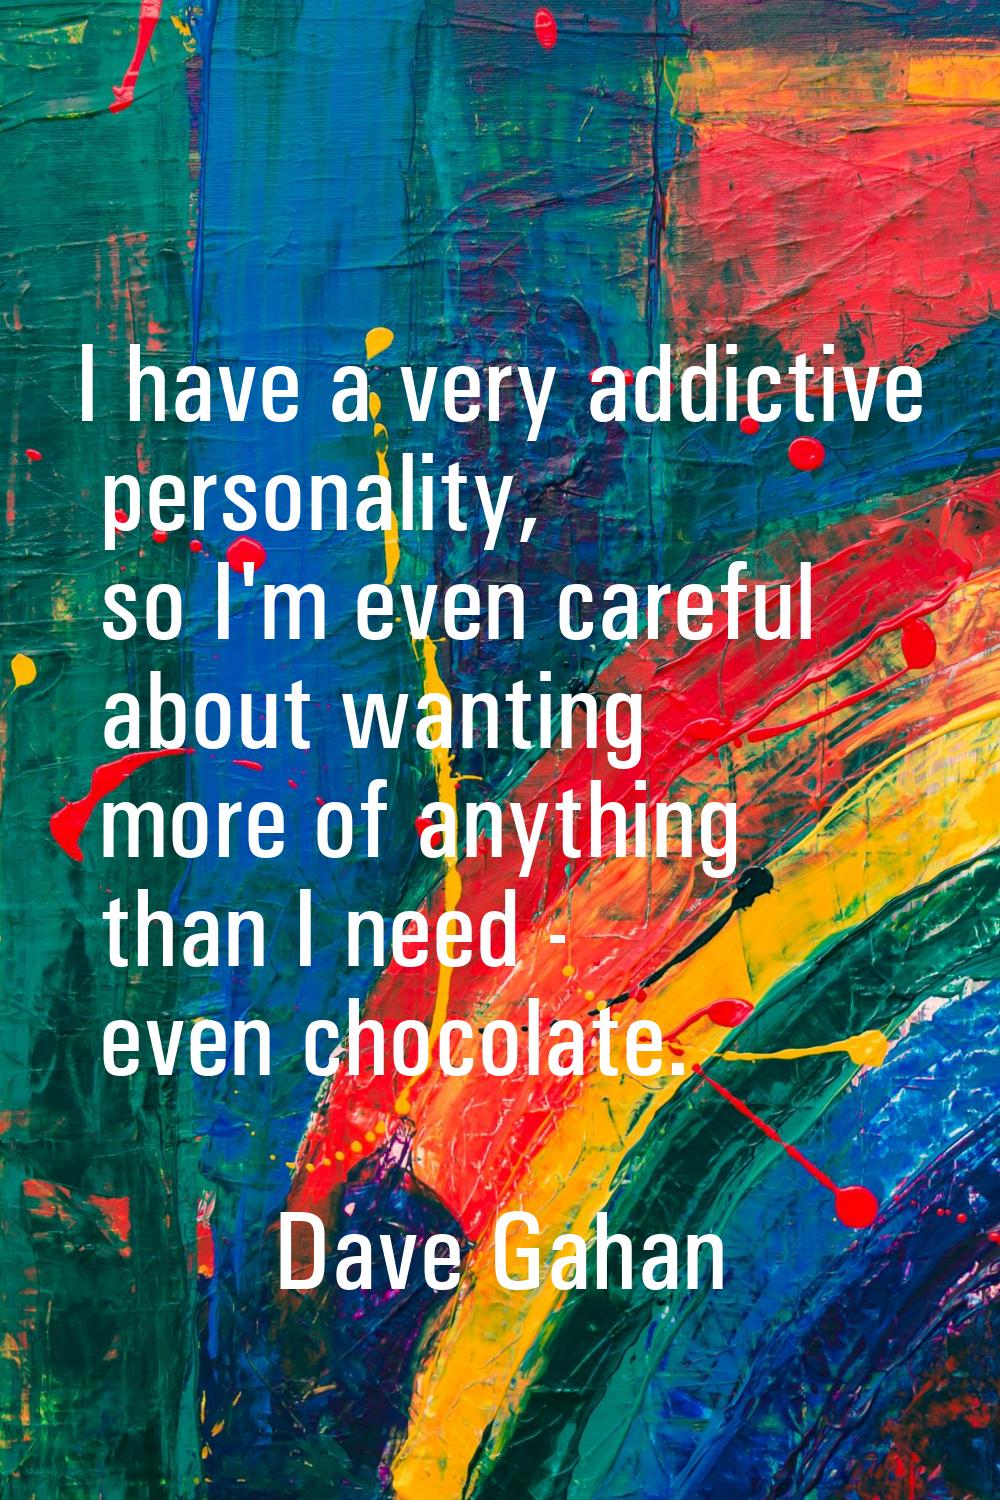 I have a very addictive personality, so I'm even careful about wanting more of anything than I need